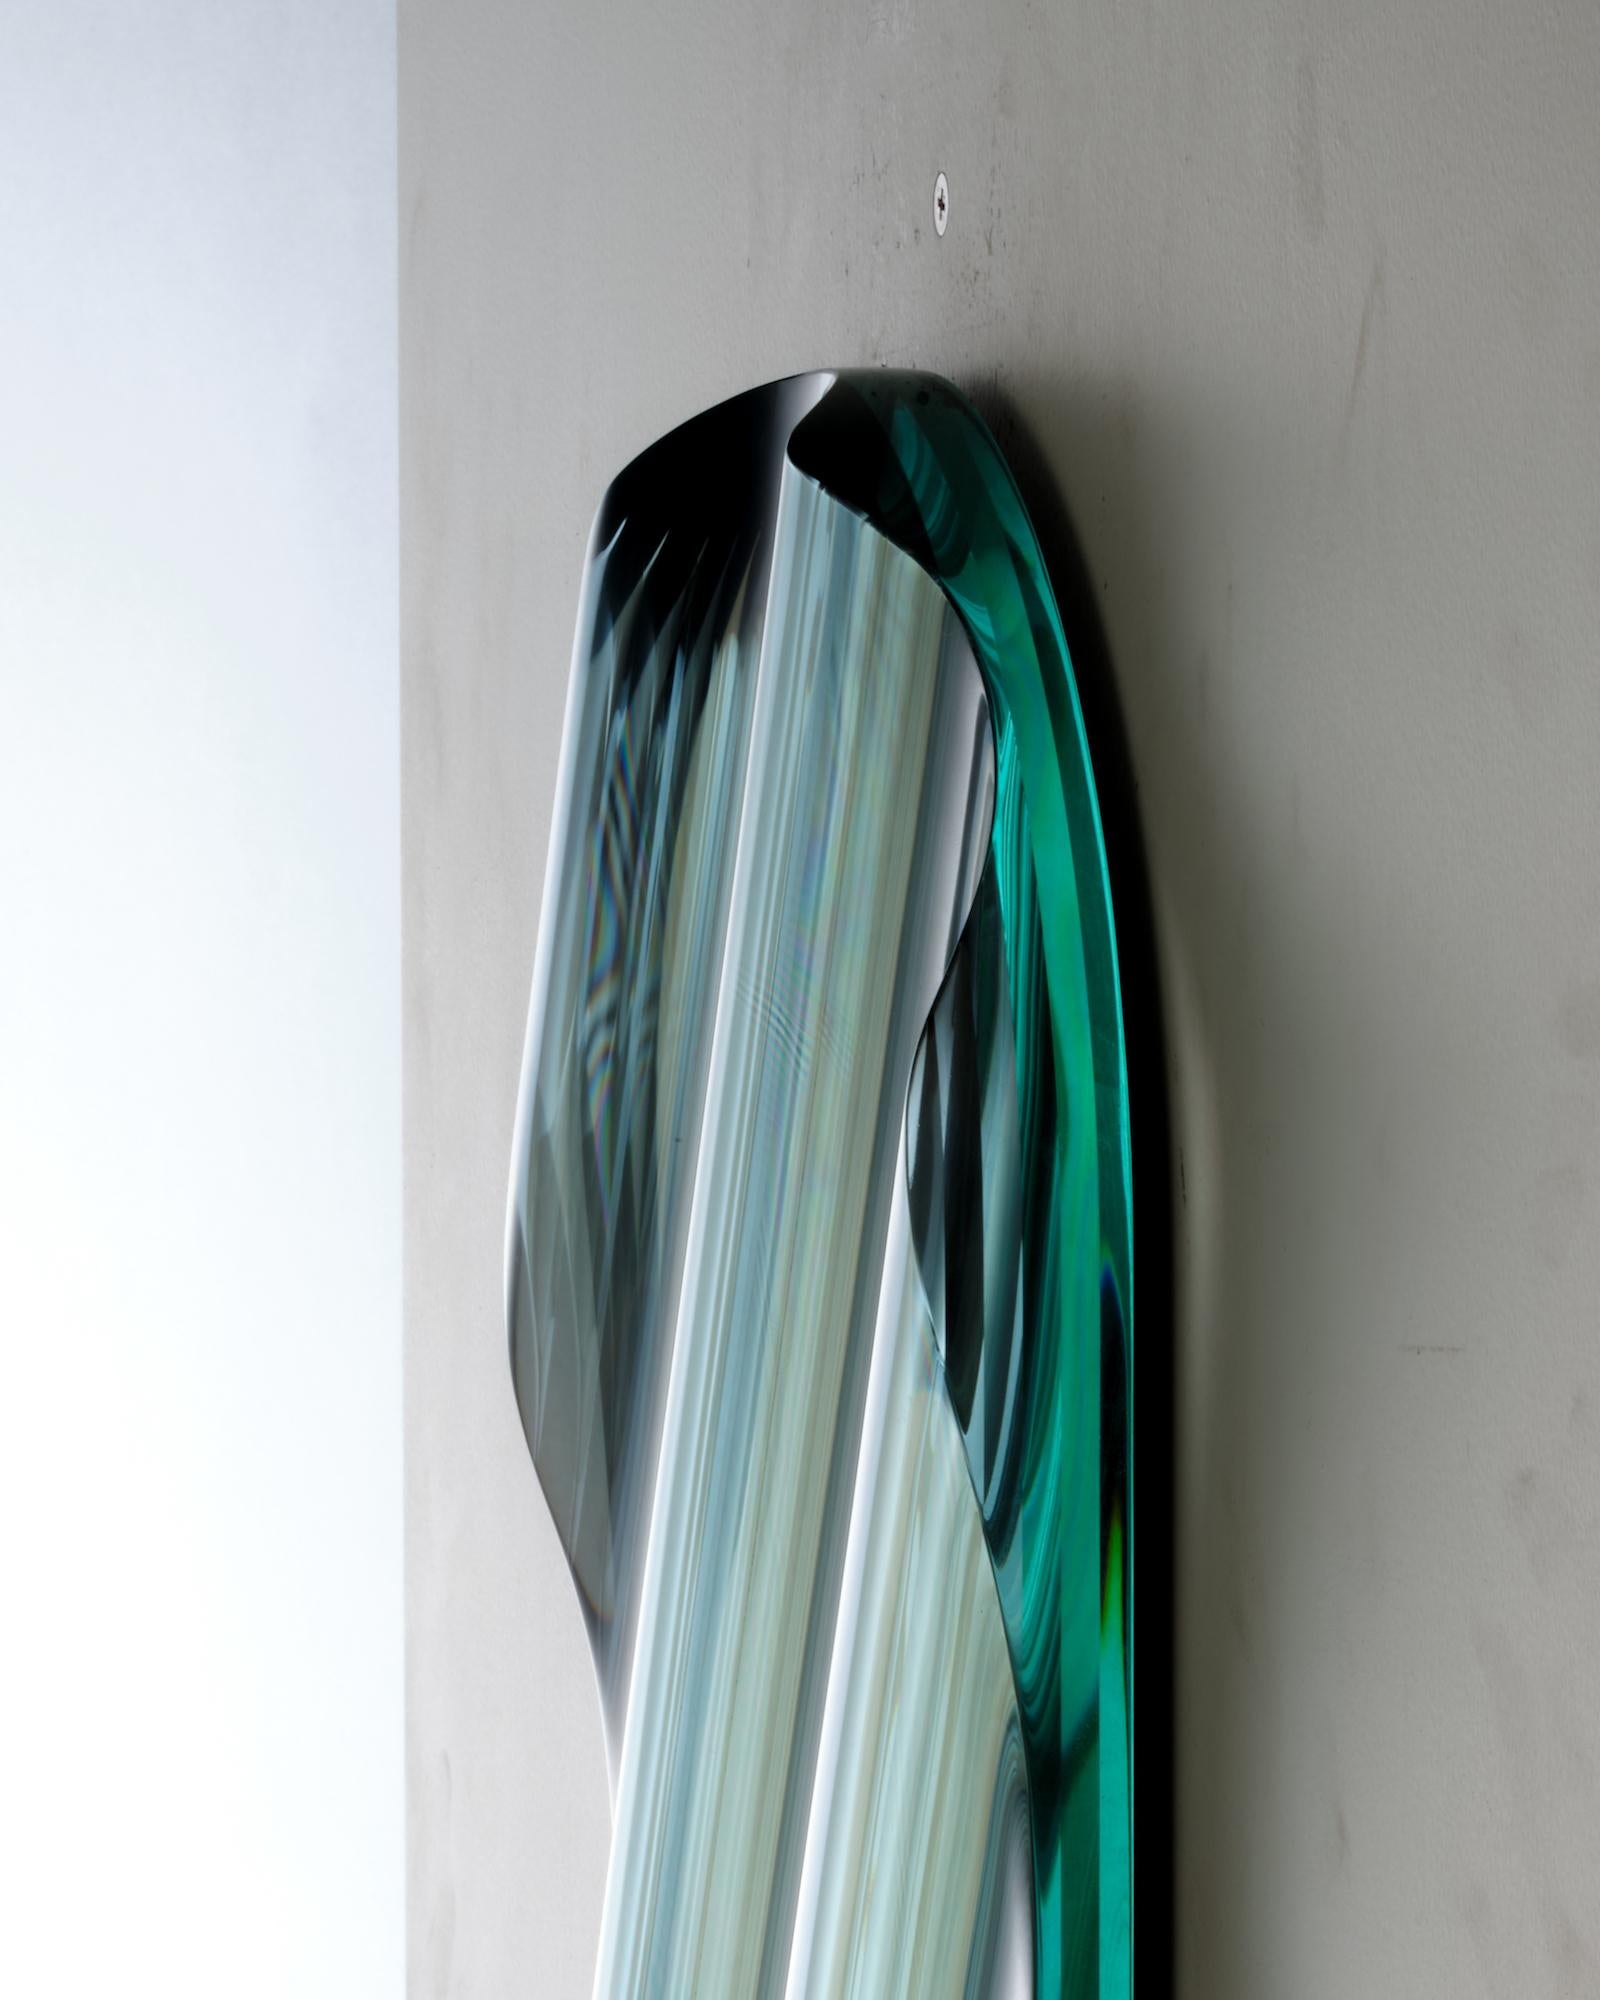 P.230501 by Toshio Iezumi - Glass, half mirror, abstract, wall sculpture For Sale 4